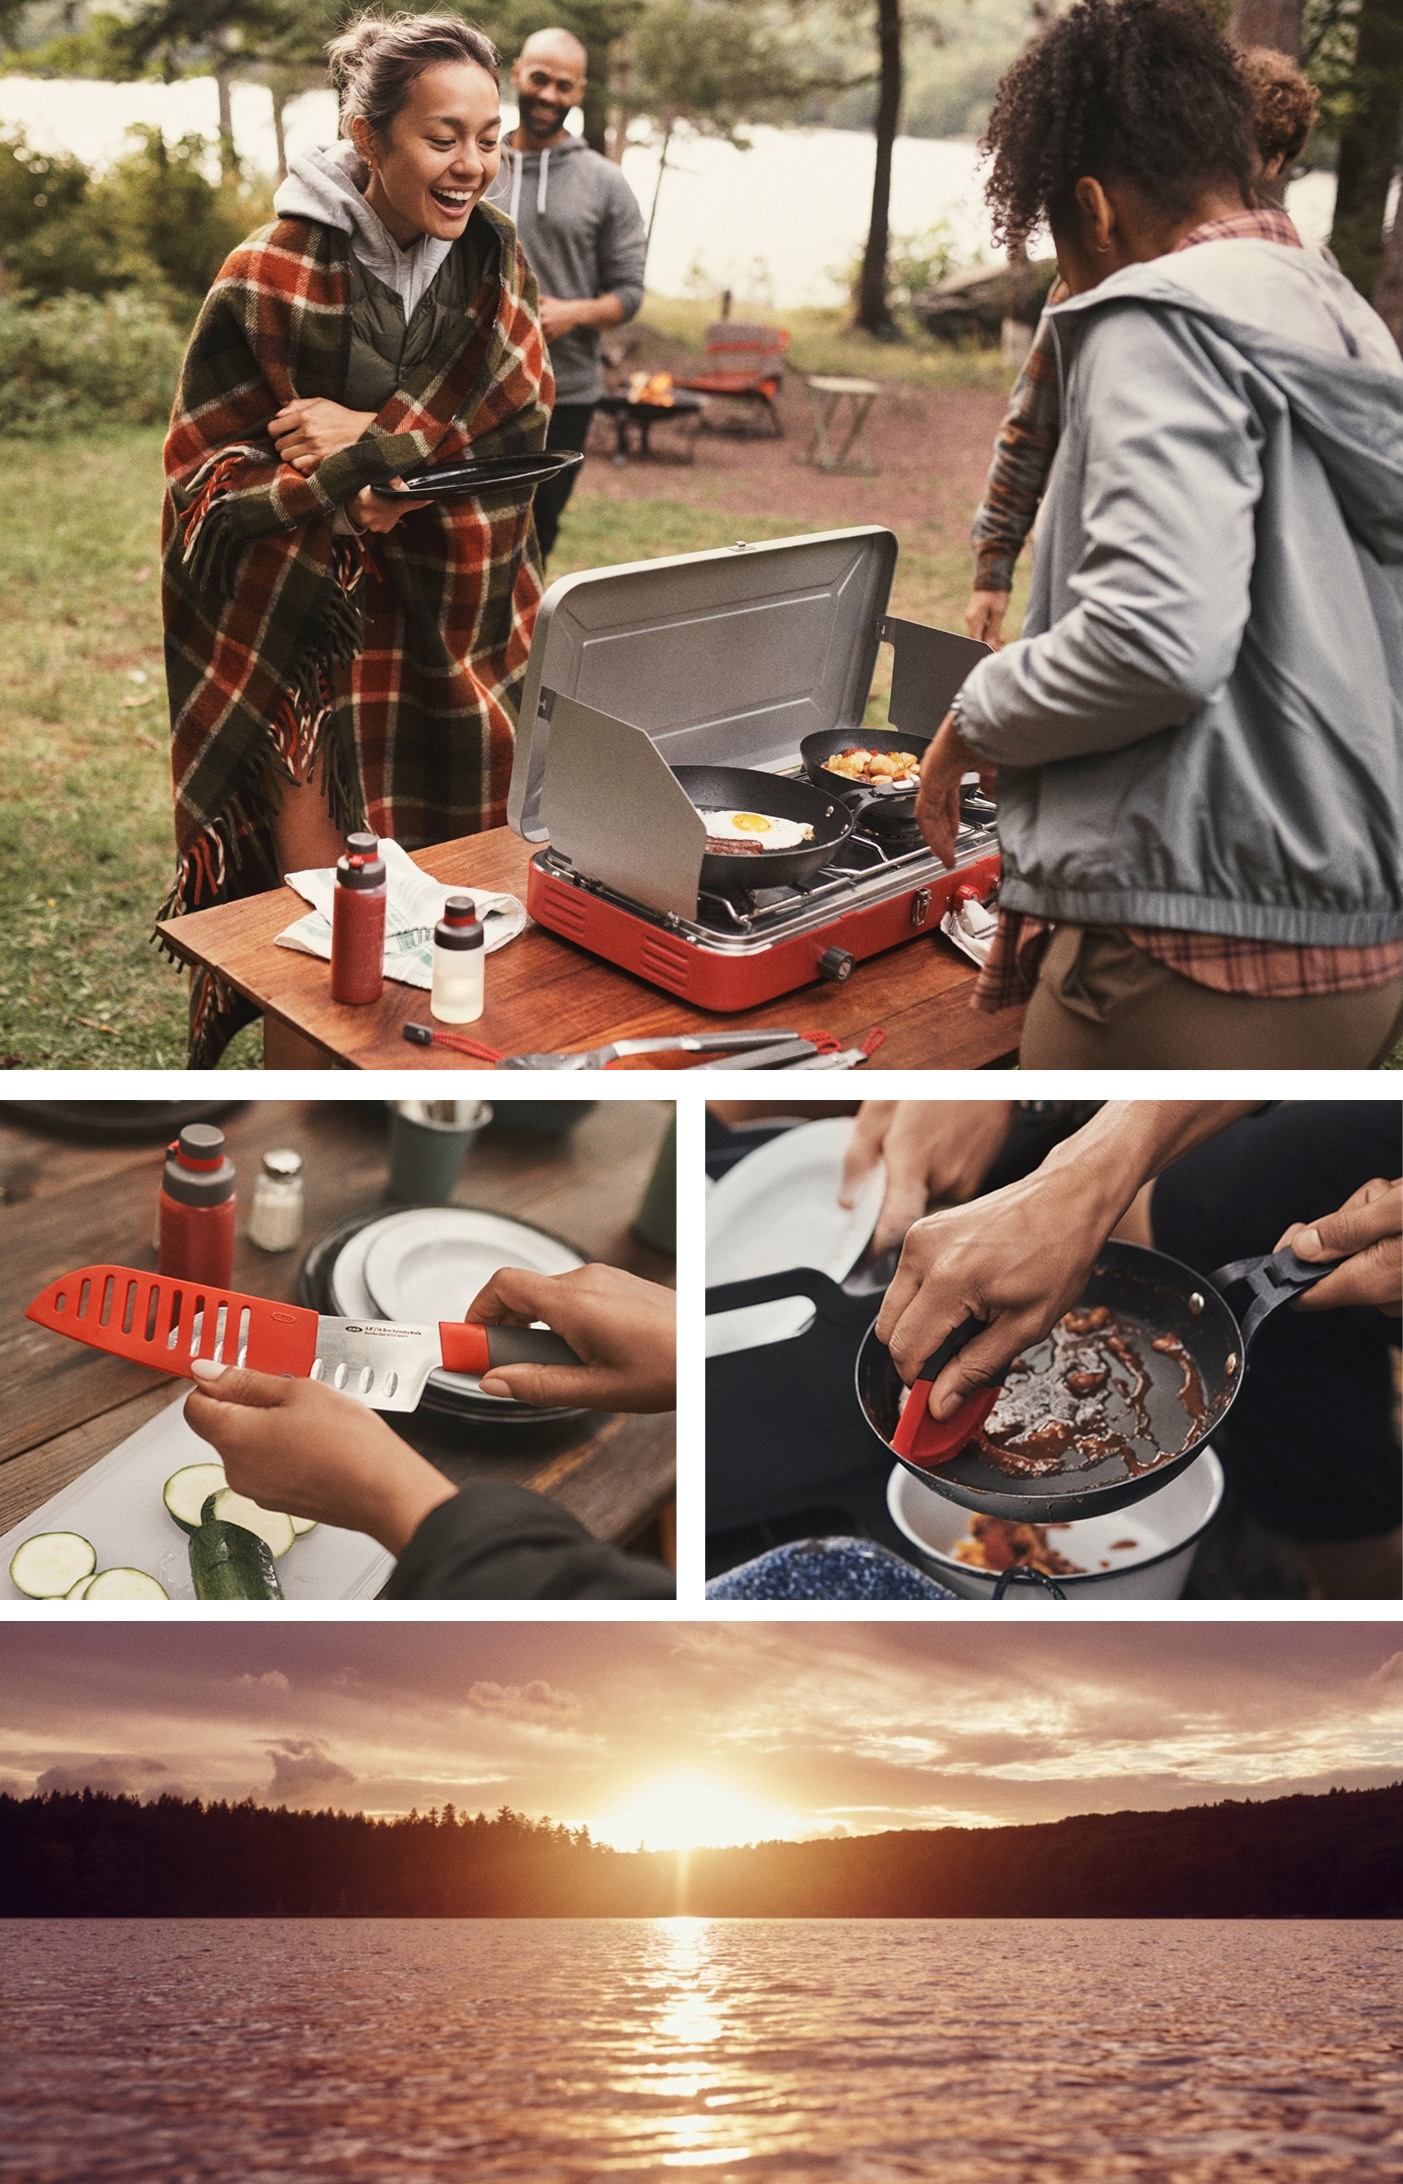 image collage of OXO outdoor products to elevate your campsite cooking